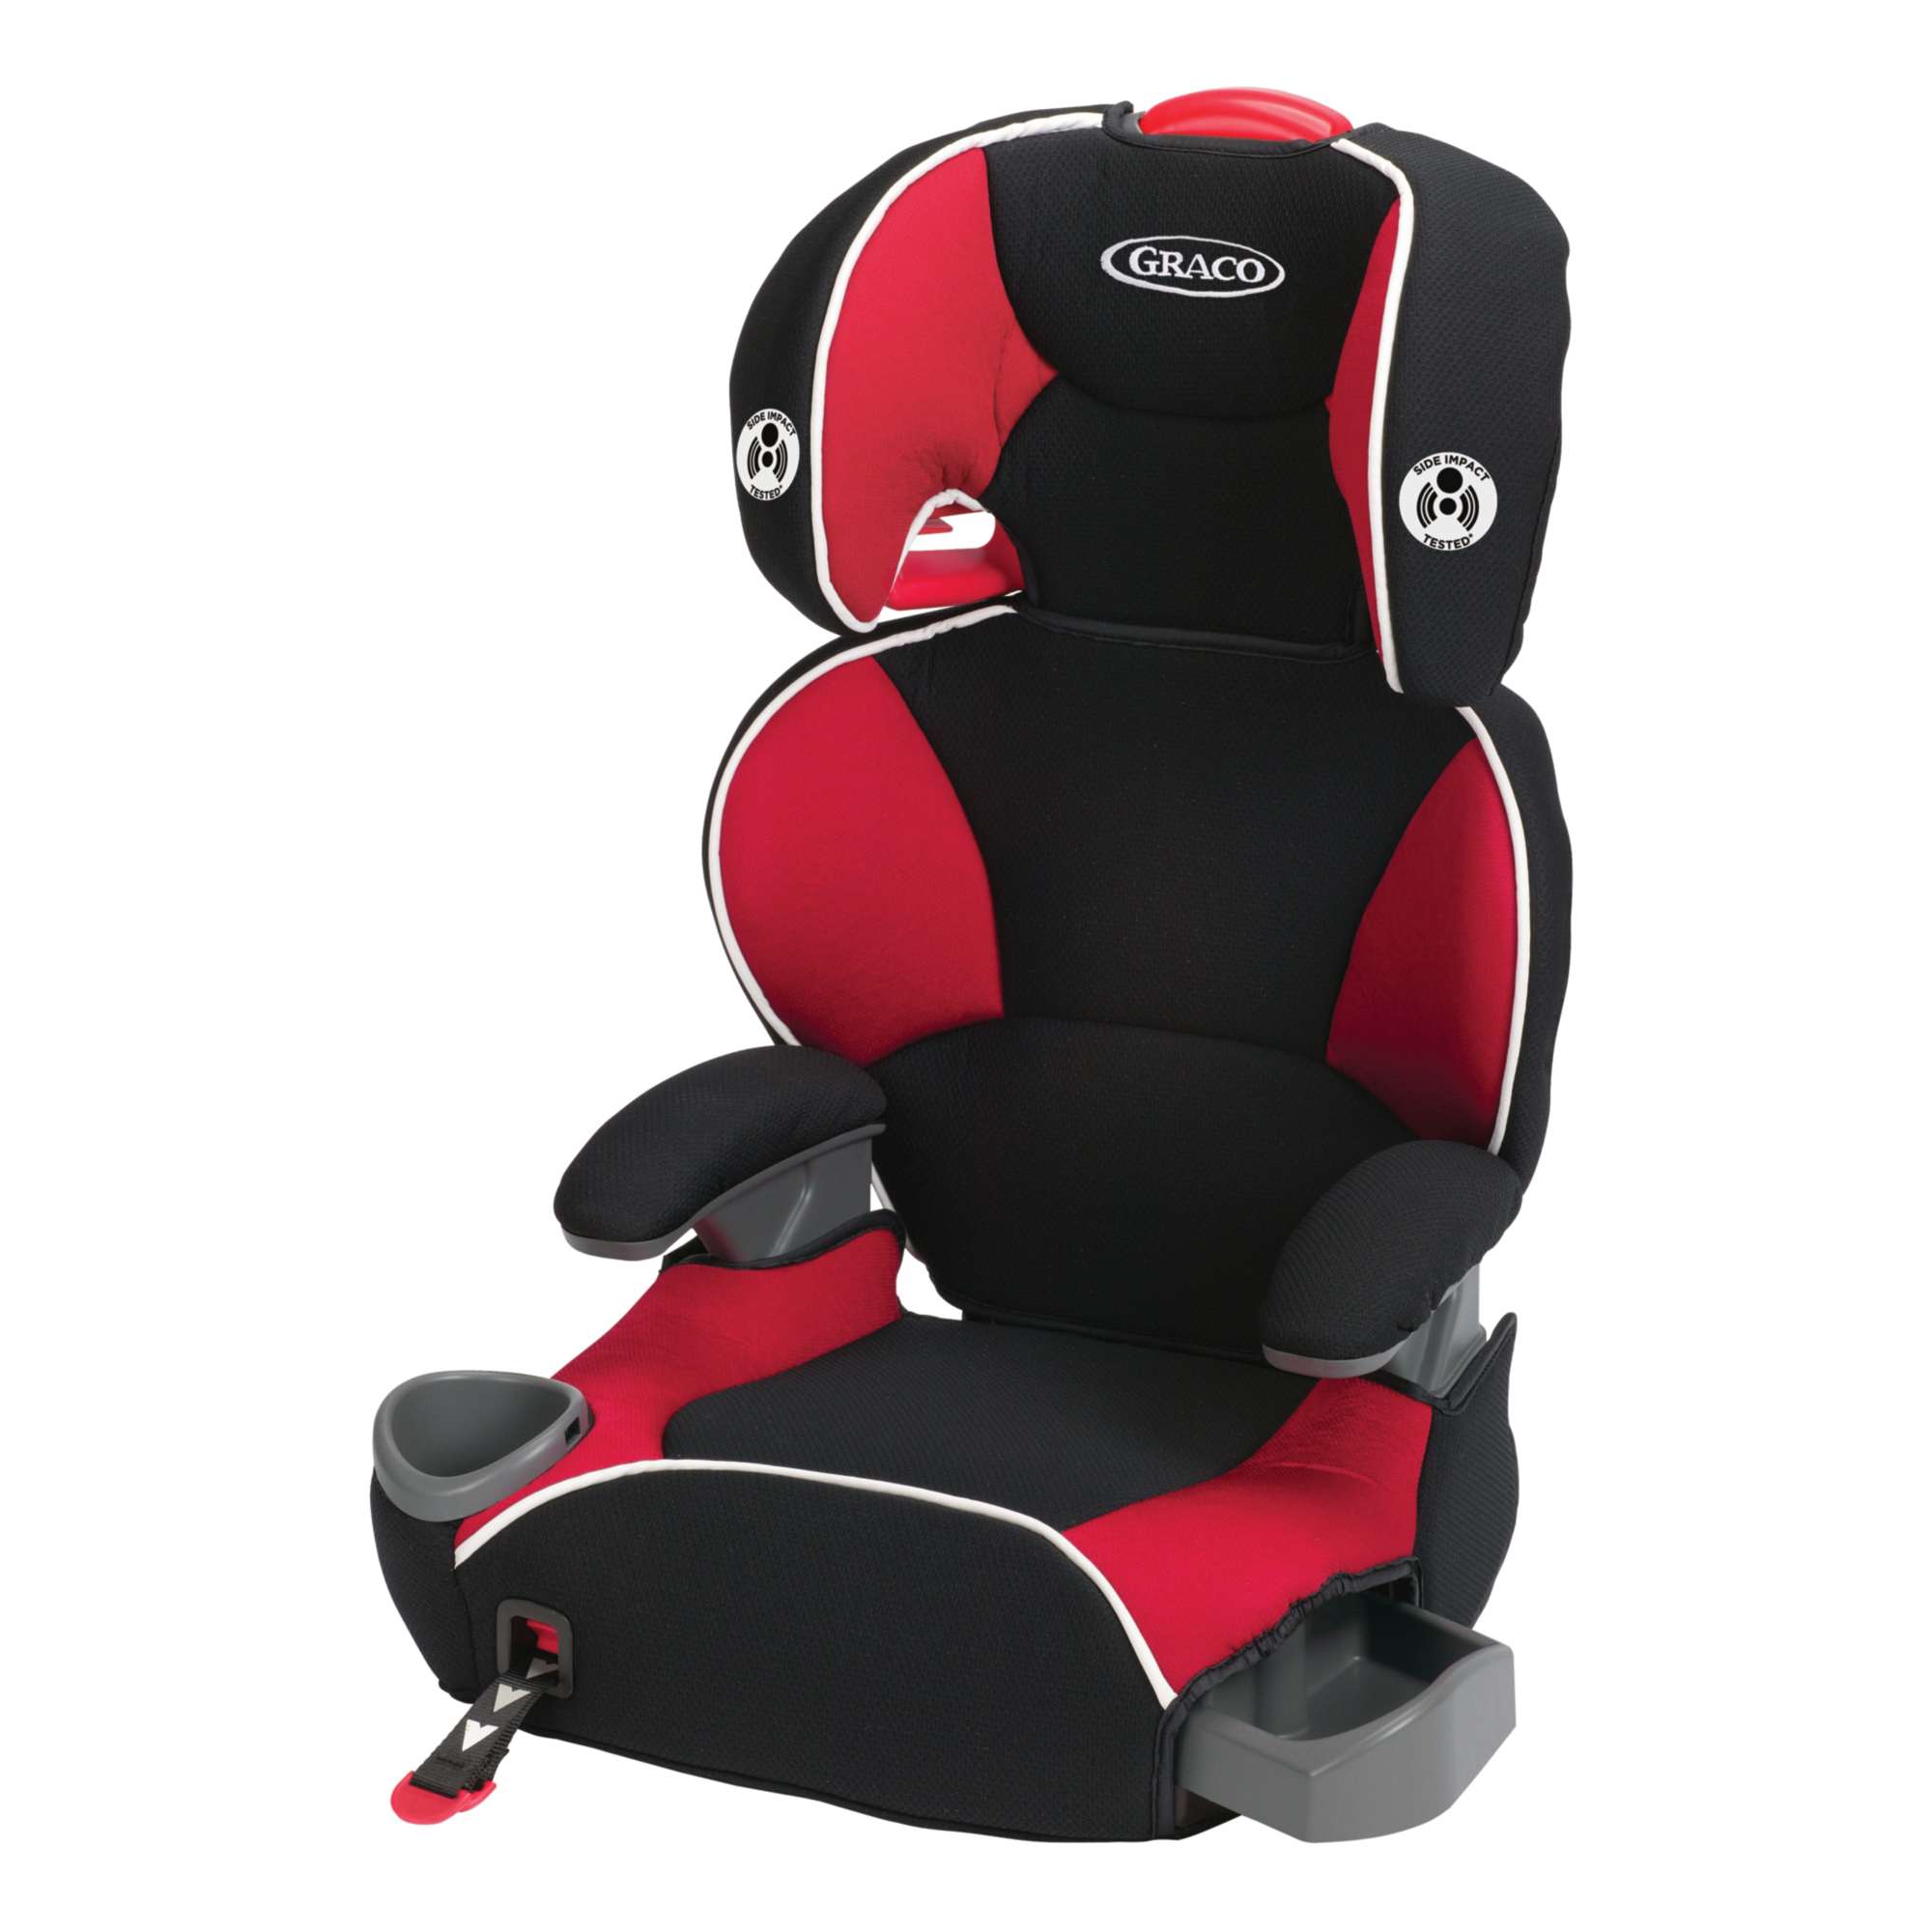 Graco คาร์ซีทเด็ก AFFIX Youth Booster Car Seat with Latch System